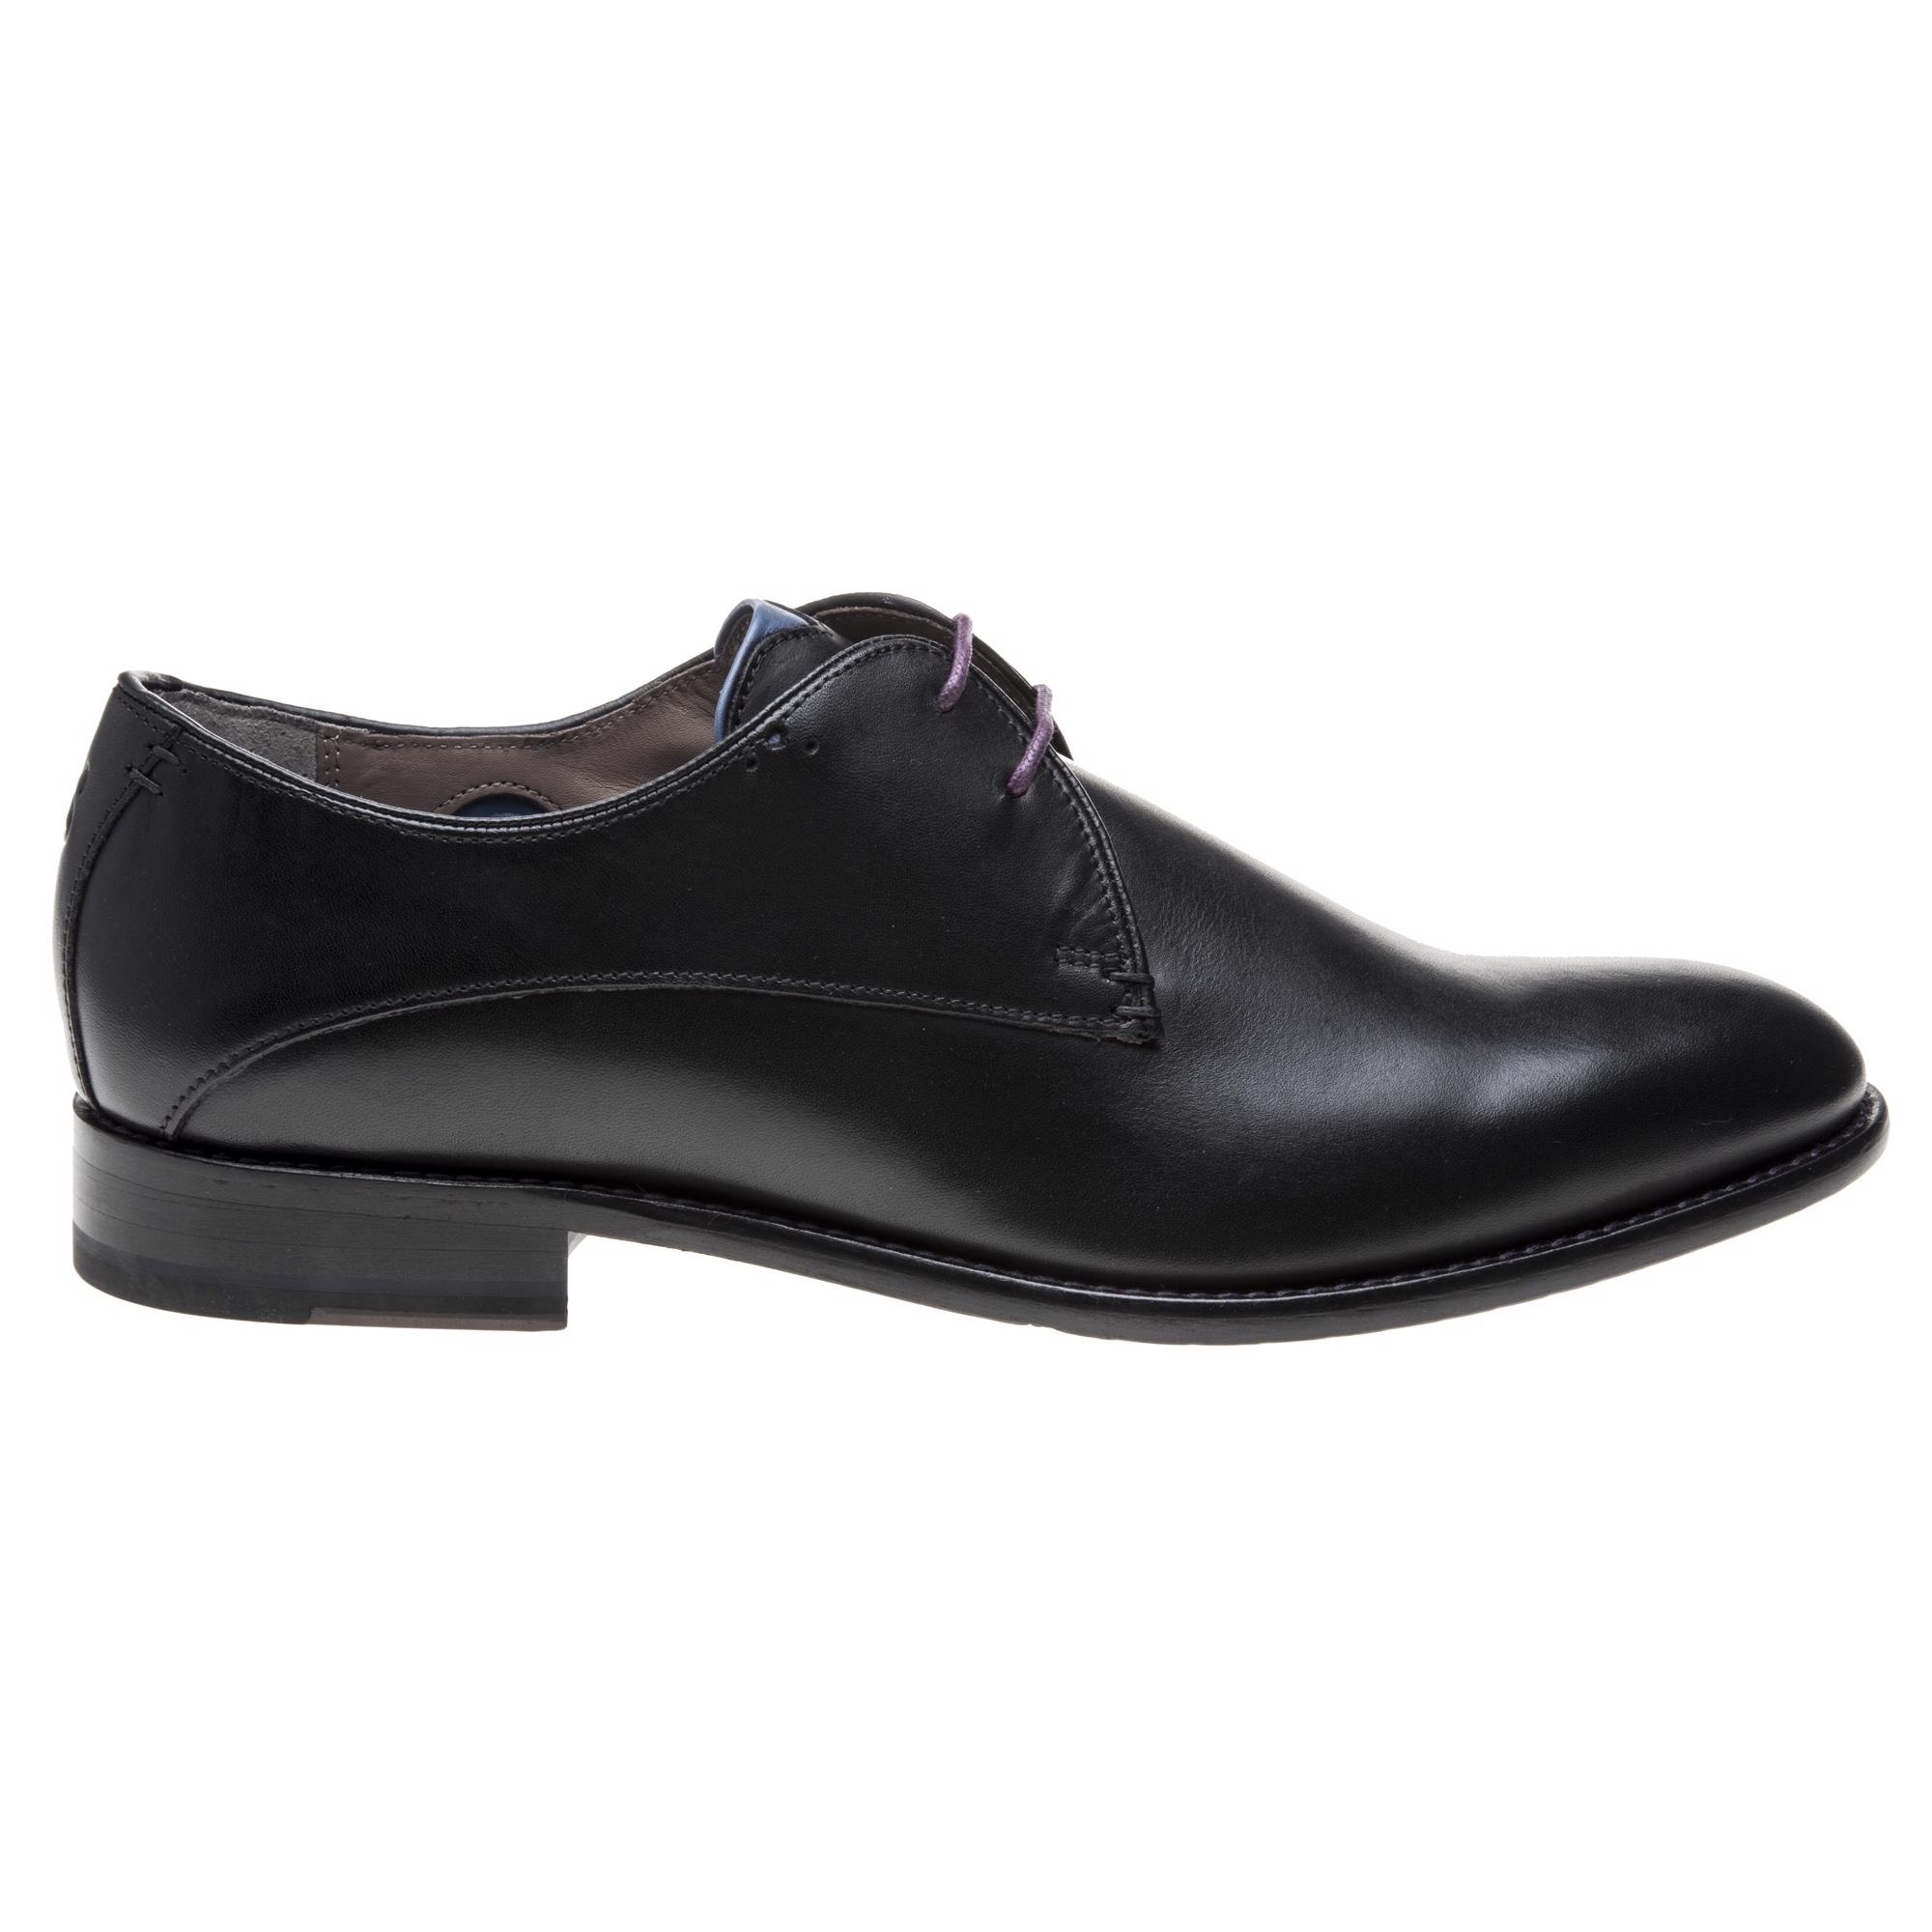 Black Lace Up Dress Shoes Knole by Oliver Sweeney 